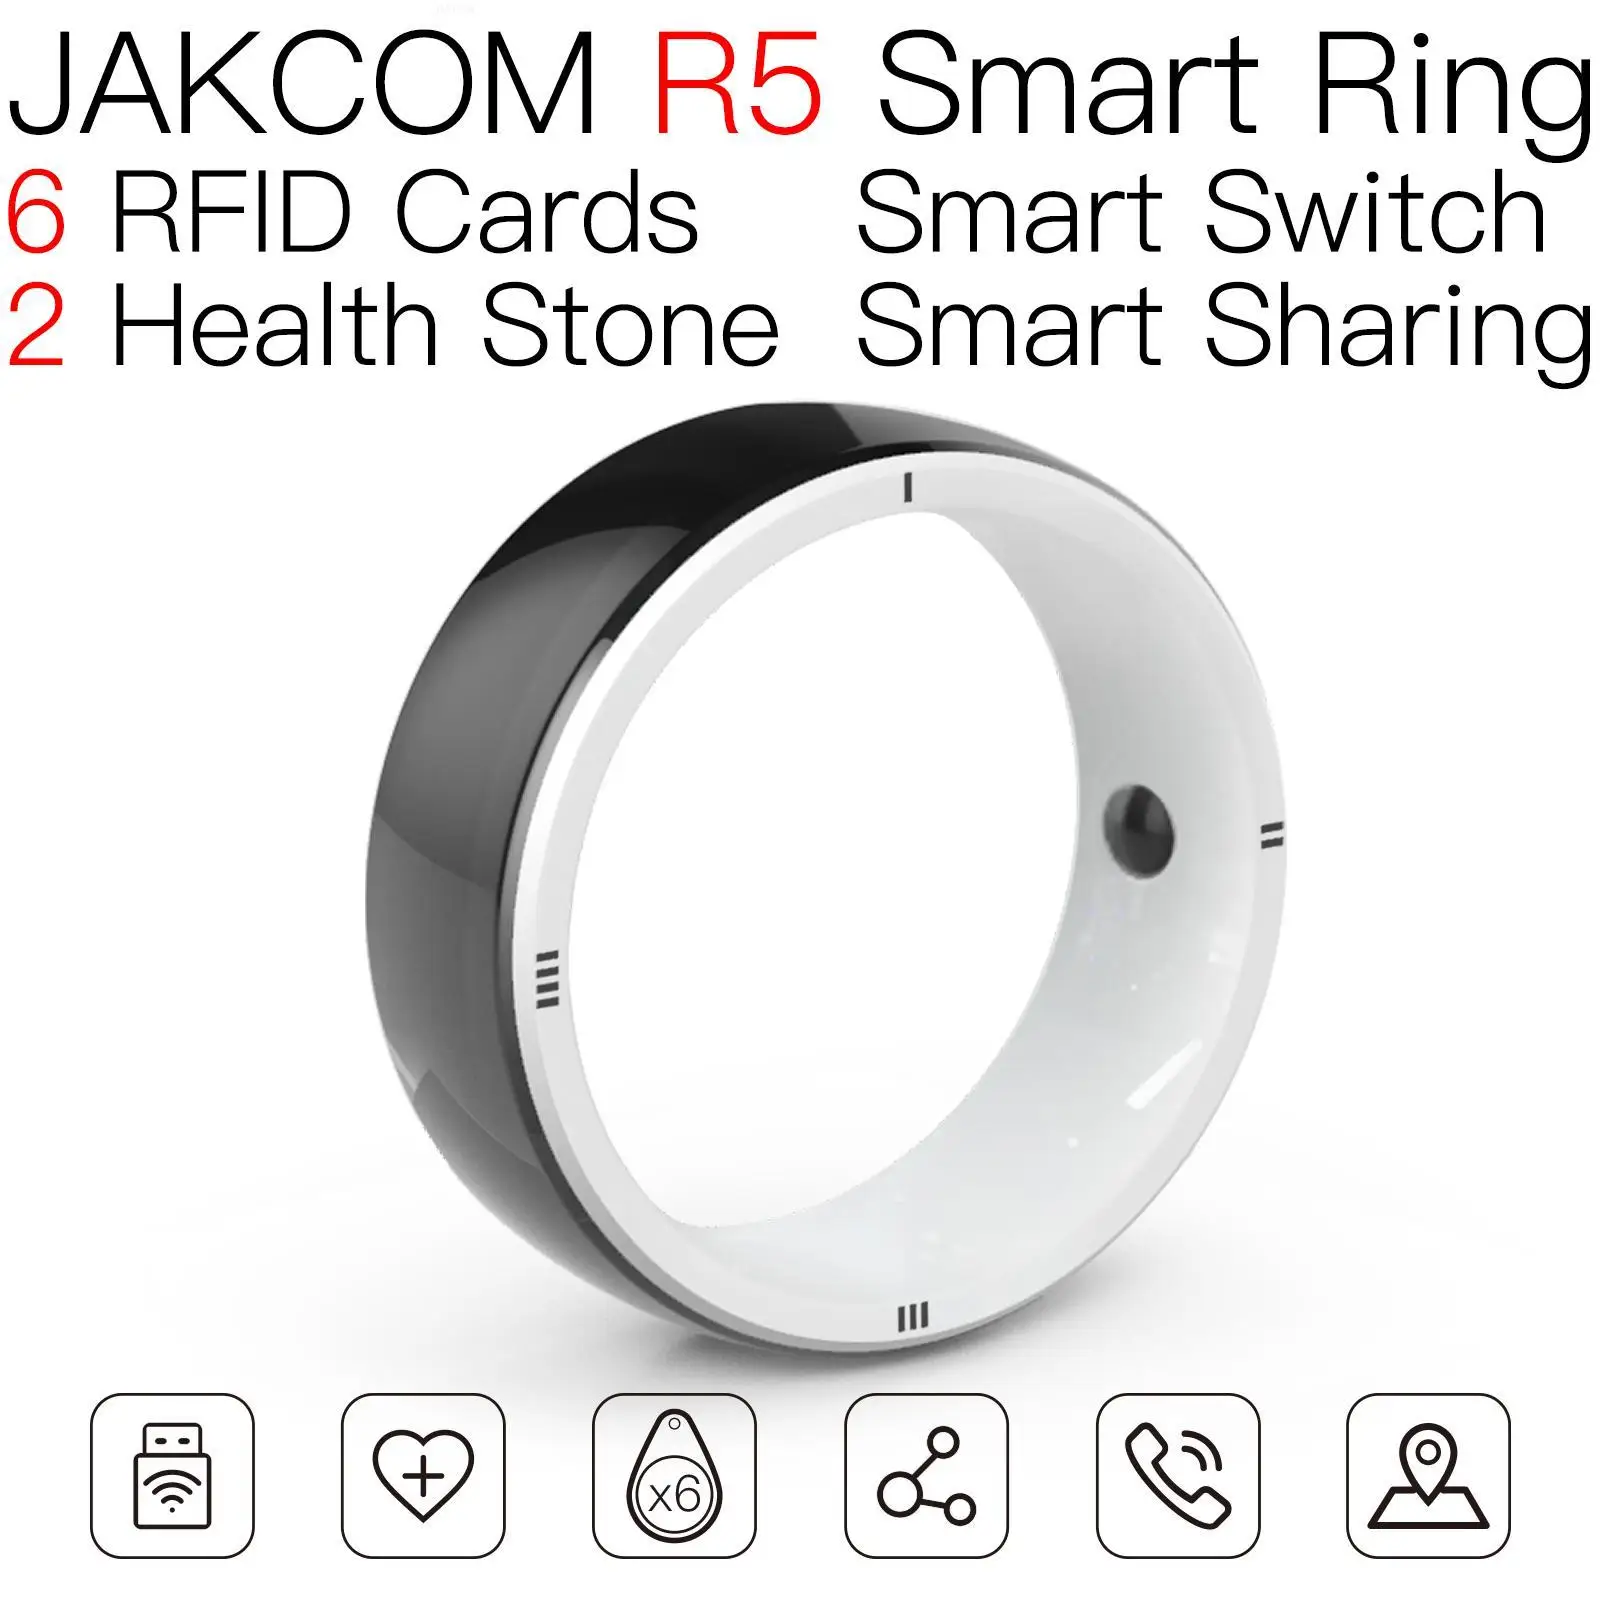 

JAKCOM R5 Smart Ring Nice than telephone first order deals free xtream code usb smart phones fixed price rfid tag with